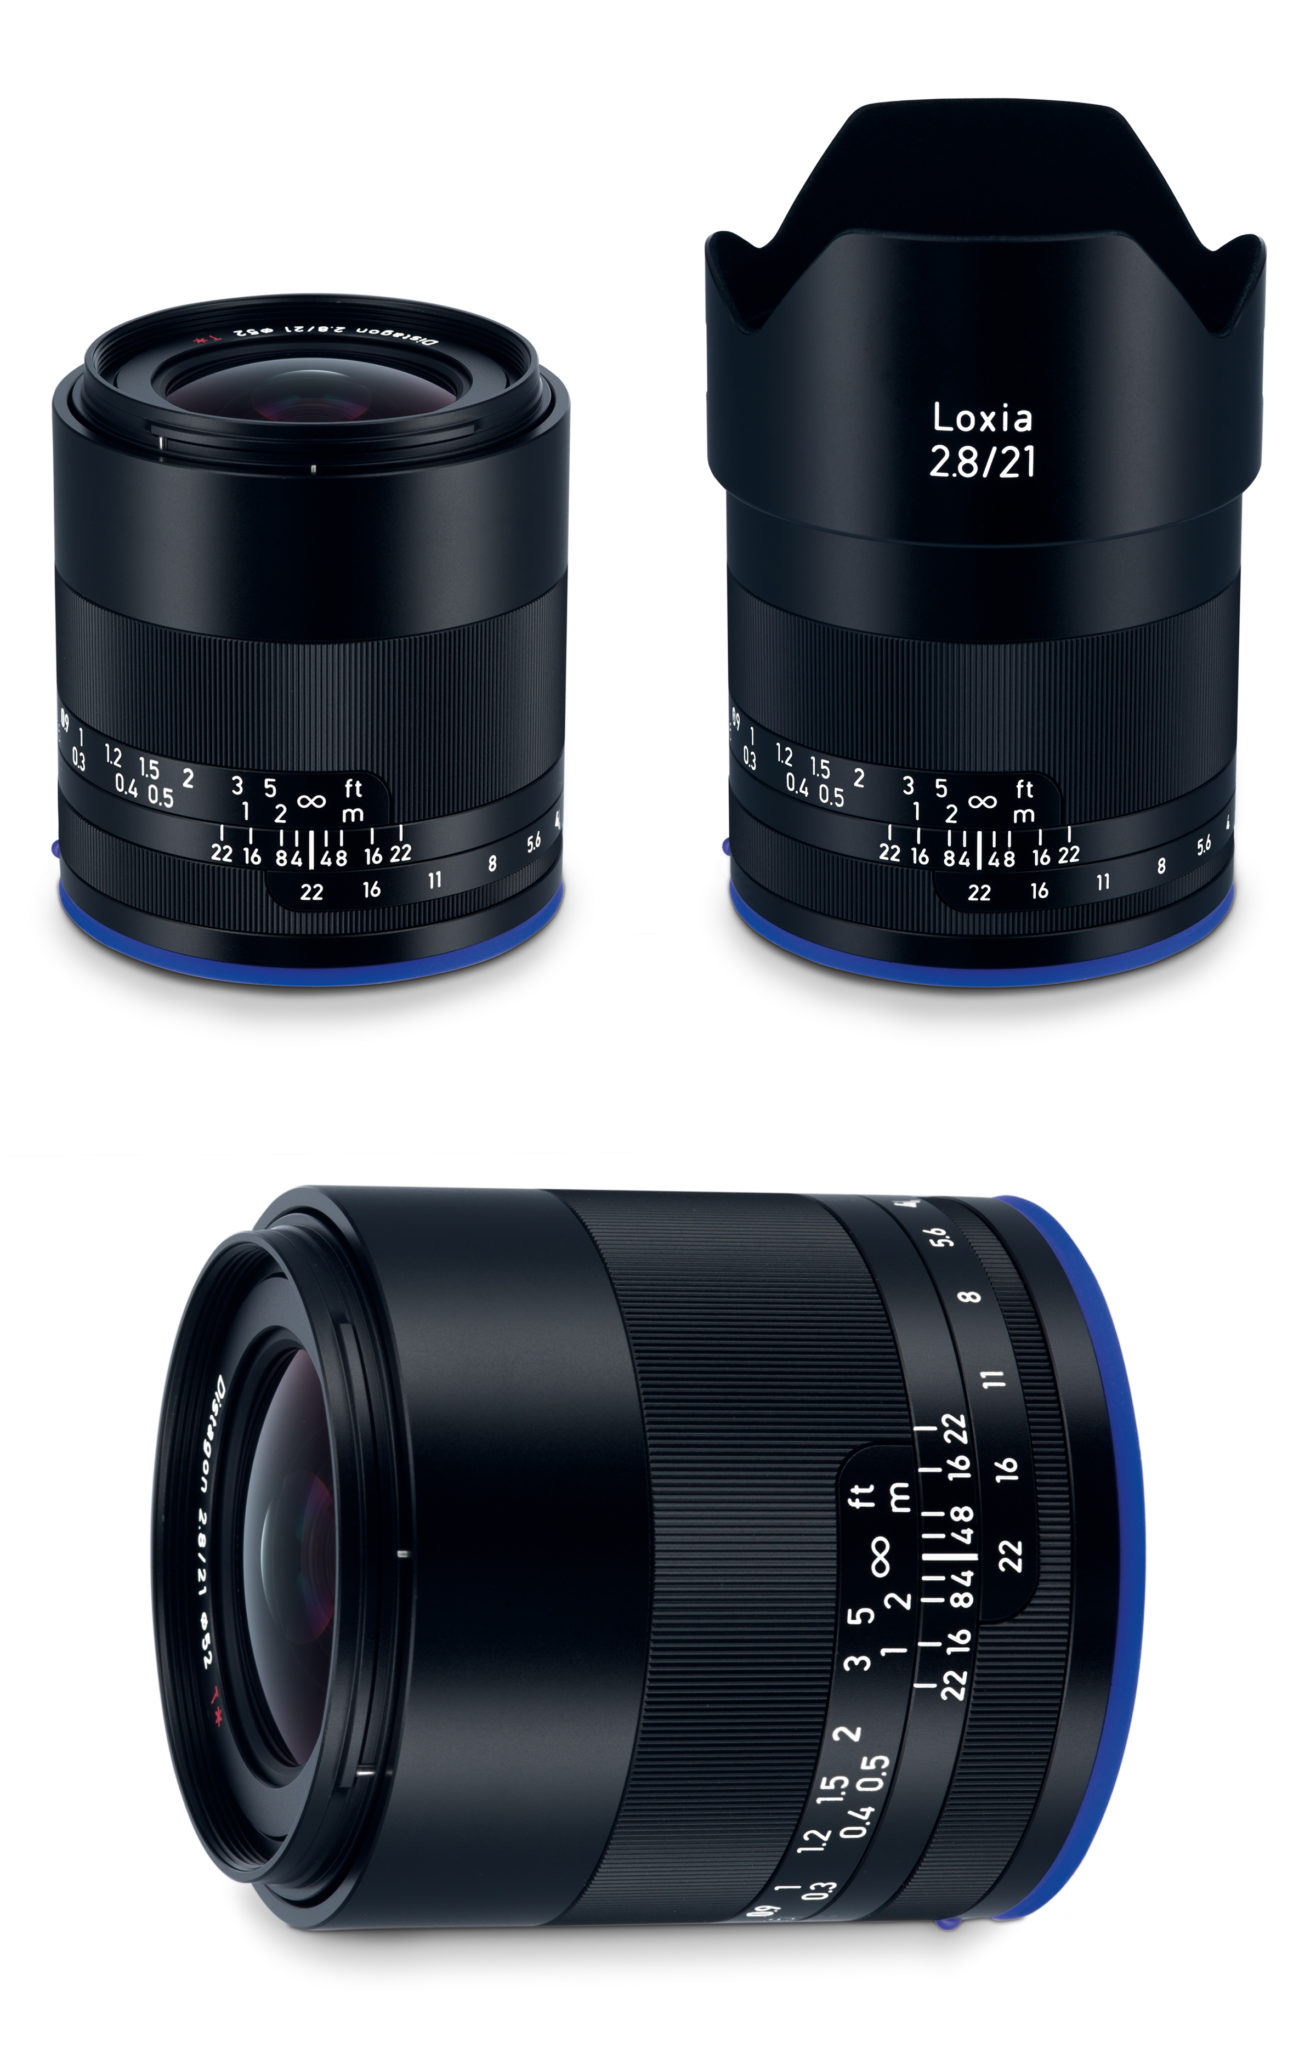 The new ZEISS Loxia 2.8/21 super wide-angle for full-frame cameras with Sony E-mount.